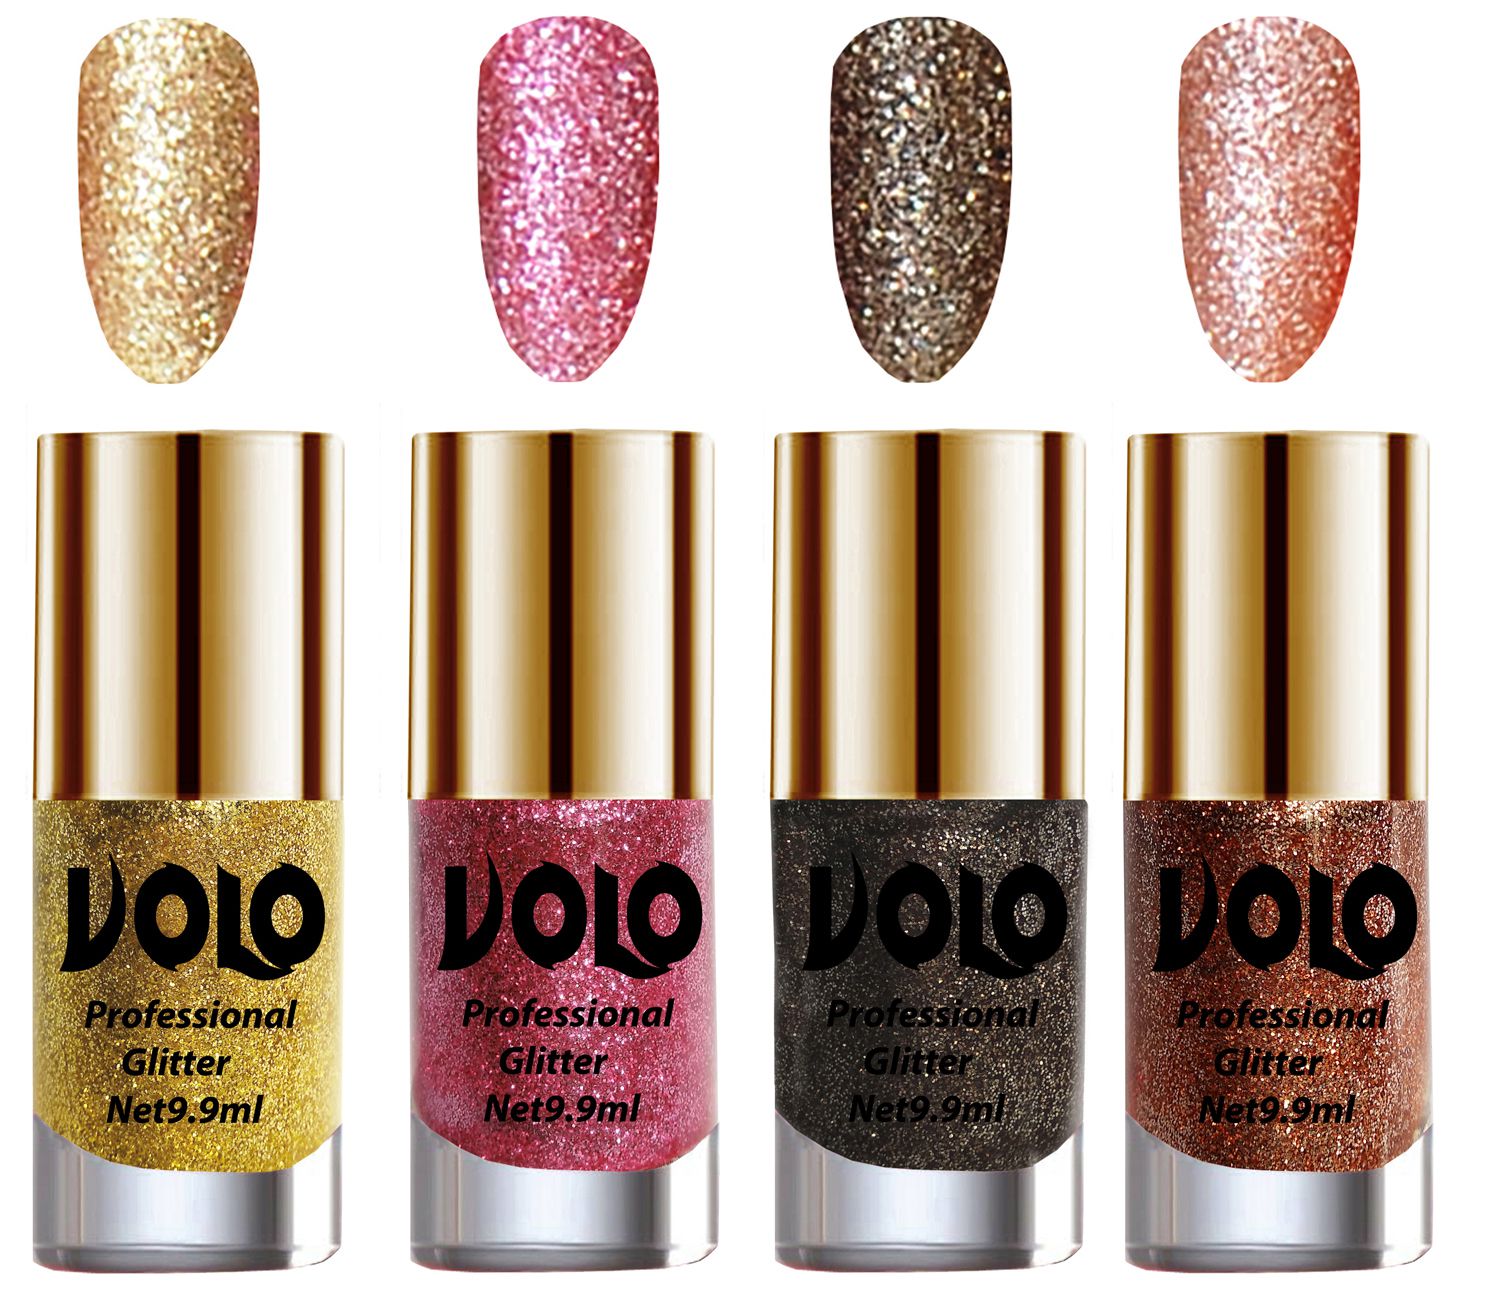     			VOLO Professionally Used Glitter Shine Nail Polish Gold,Pink,Grey Pink Pack of 4 39 mL